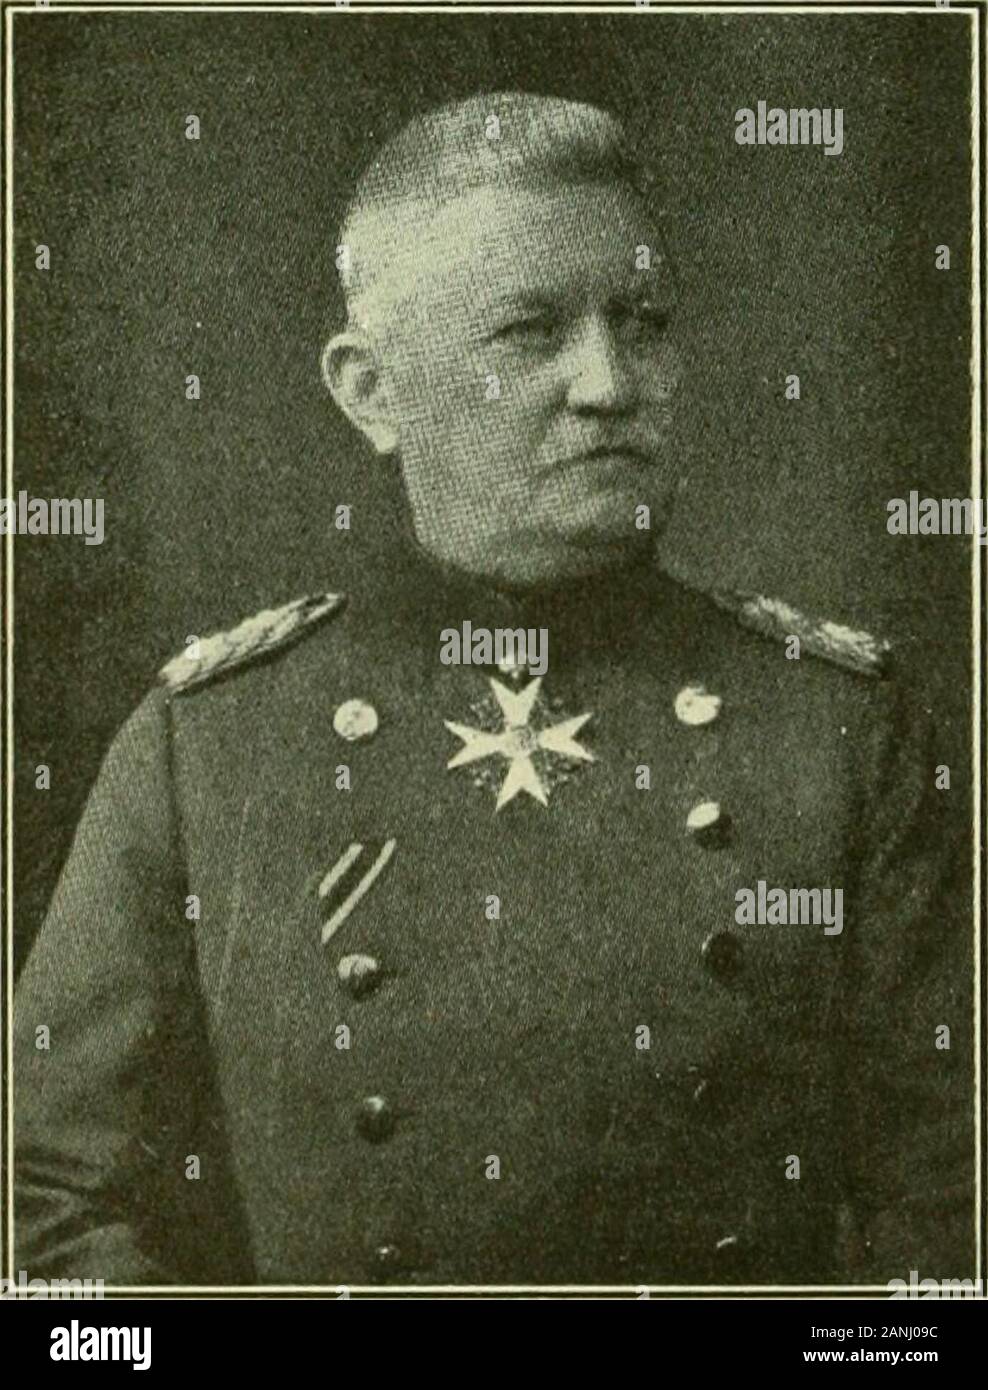 Germany's fighting machine; her army, her navy, her air-ships, and why she arrayed them against the allied powers of Europe . General von Heeringen General von Eichhorn. MaSSTi •??-»1 i J^H^^J4J ^^^^ r I ^^HS^kPO ?T^^^^ HH ^^H^L-^^^l c General von Biilow General von Prittwitz THE WAR 13 inquiry into the matter, which was carried on very de-hberately by Austria, with no sensational charges oraccusations, revealed a great plot reaching to the verysteps of the Servian throne. Around that throne, as theworld well knows, were the men who had deliberatelymurdered their own previous king and queen an Stock Photo